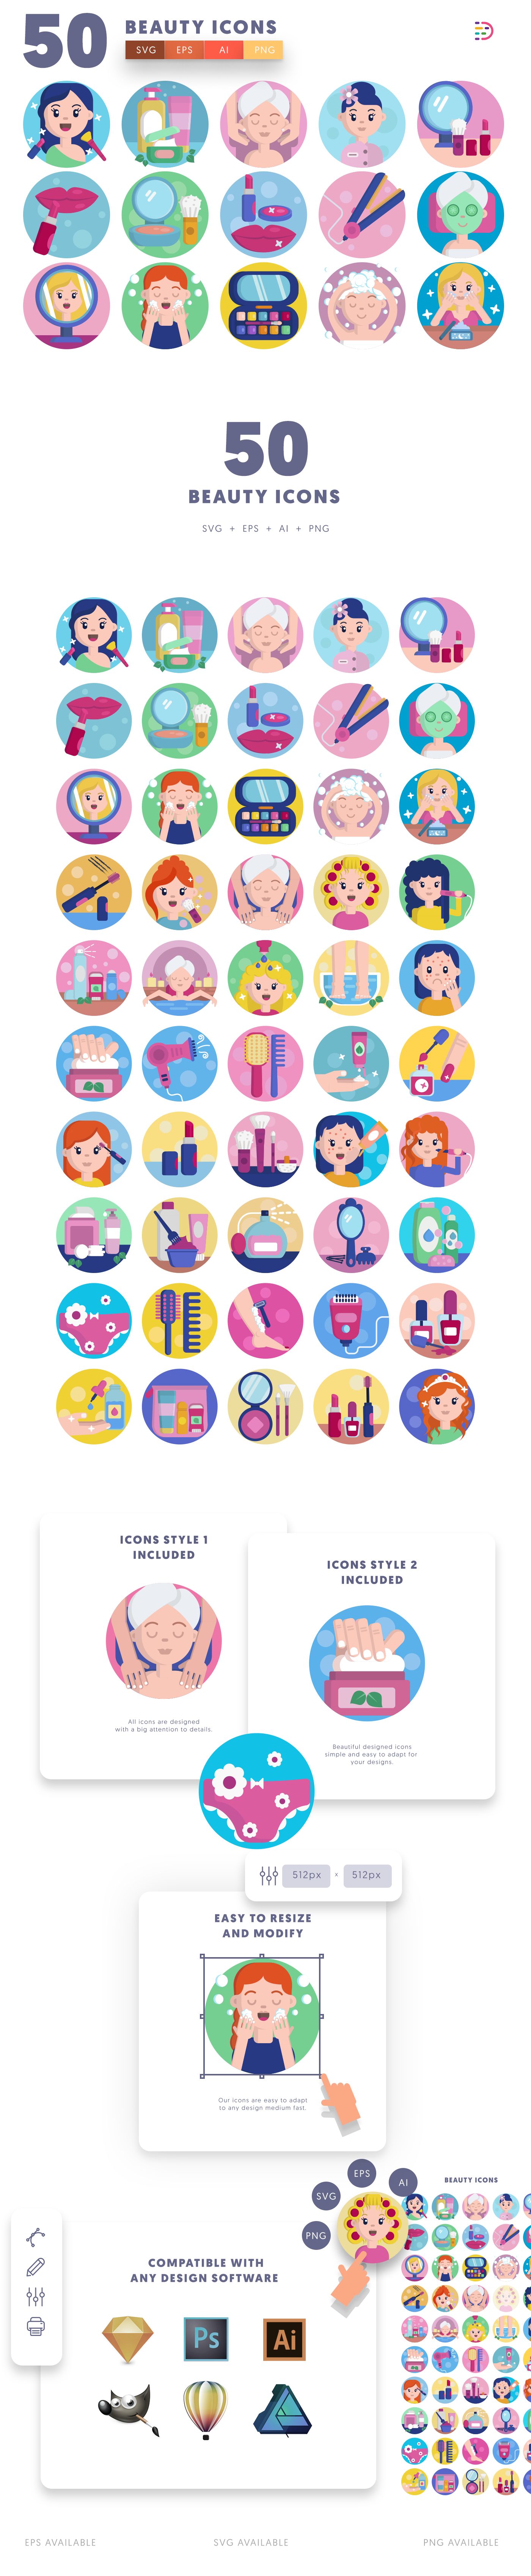 Beauty icons info graphic